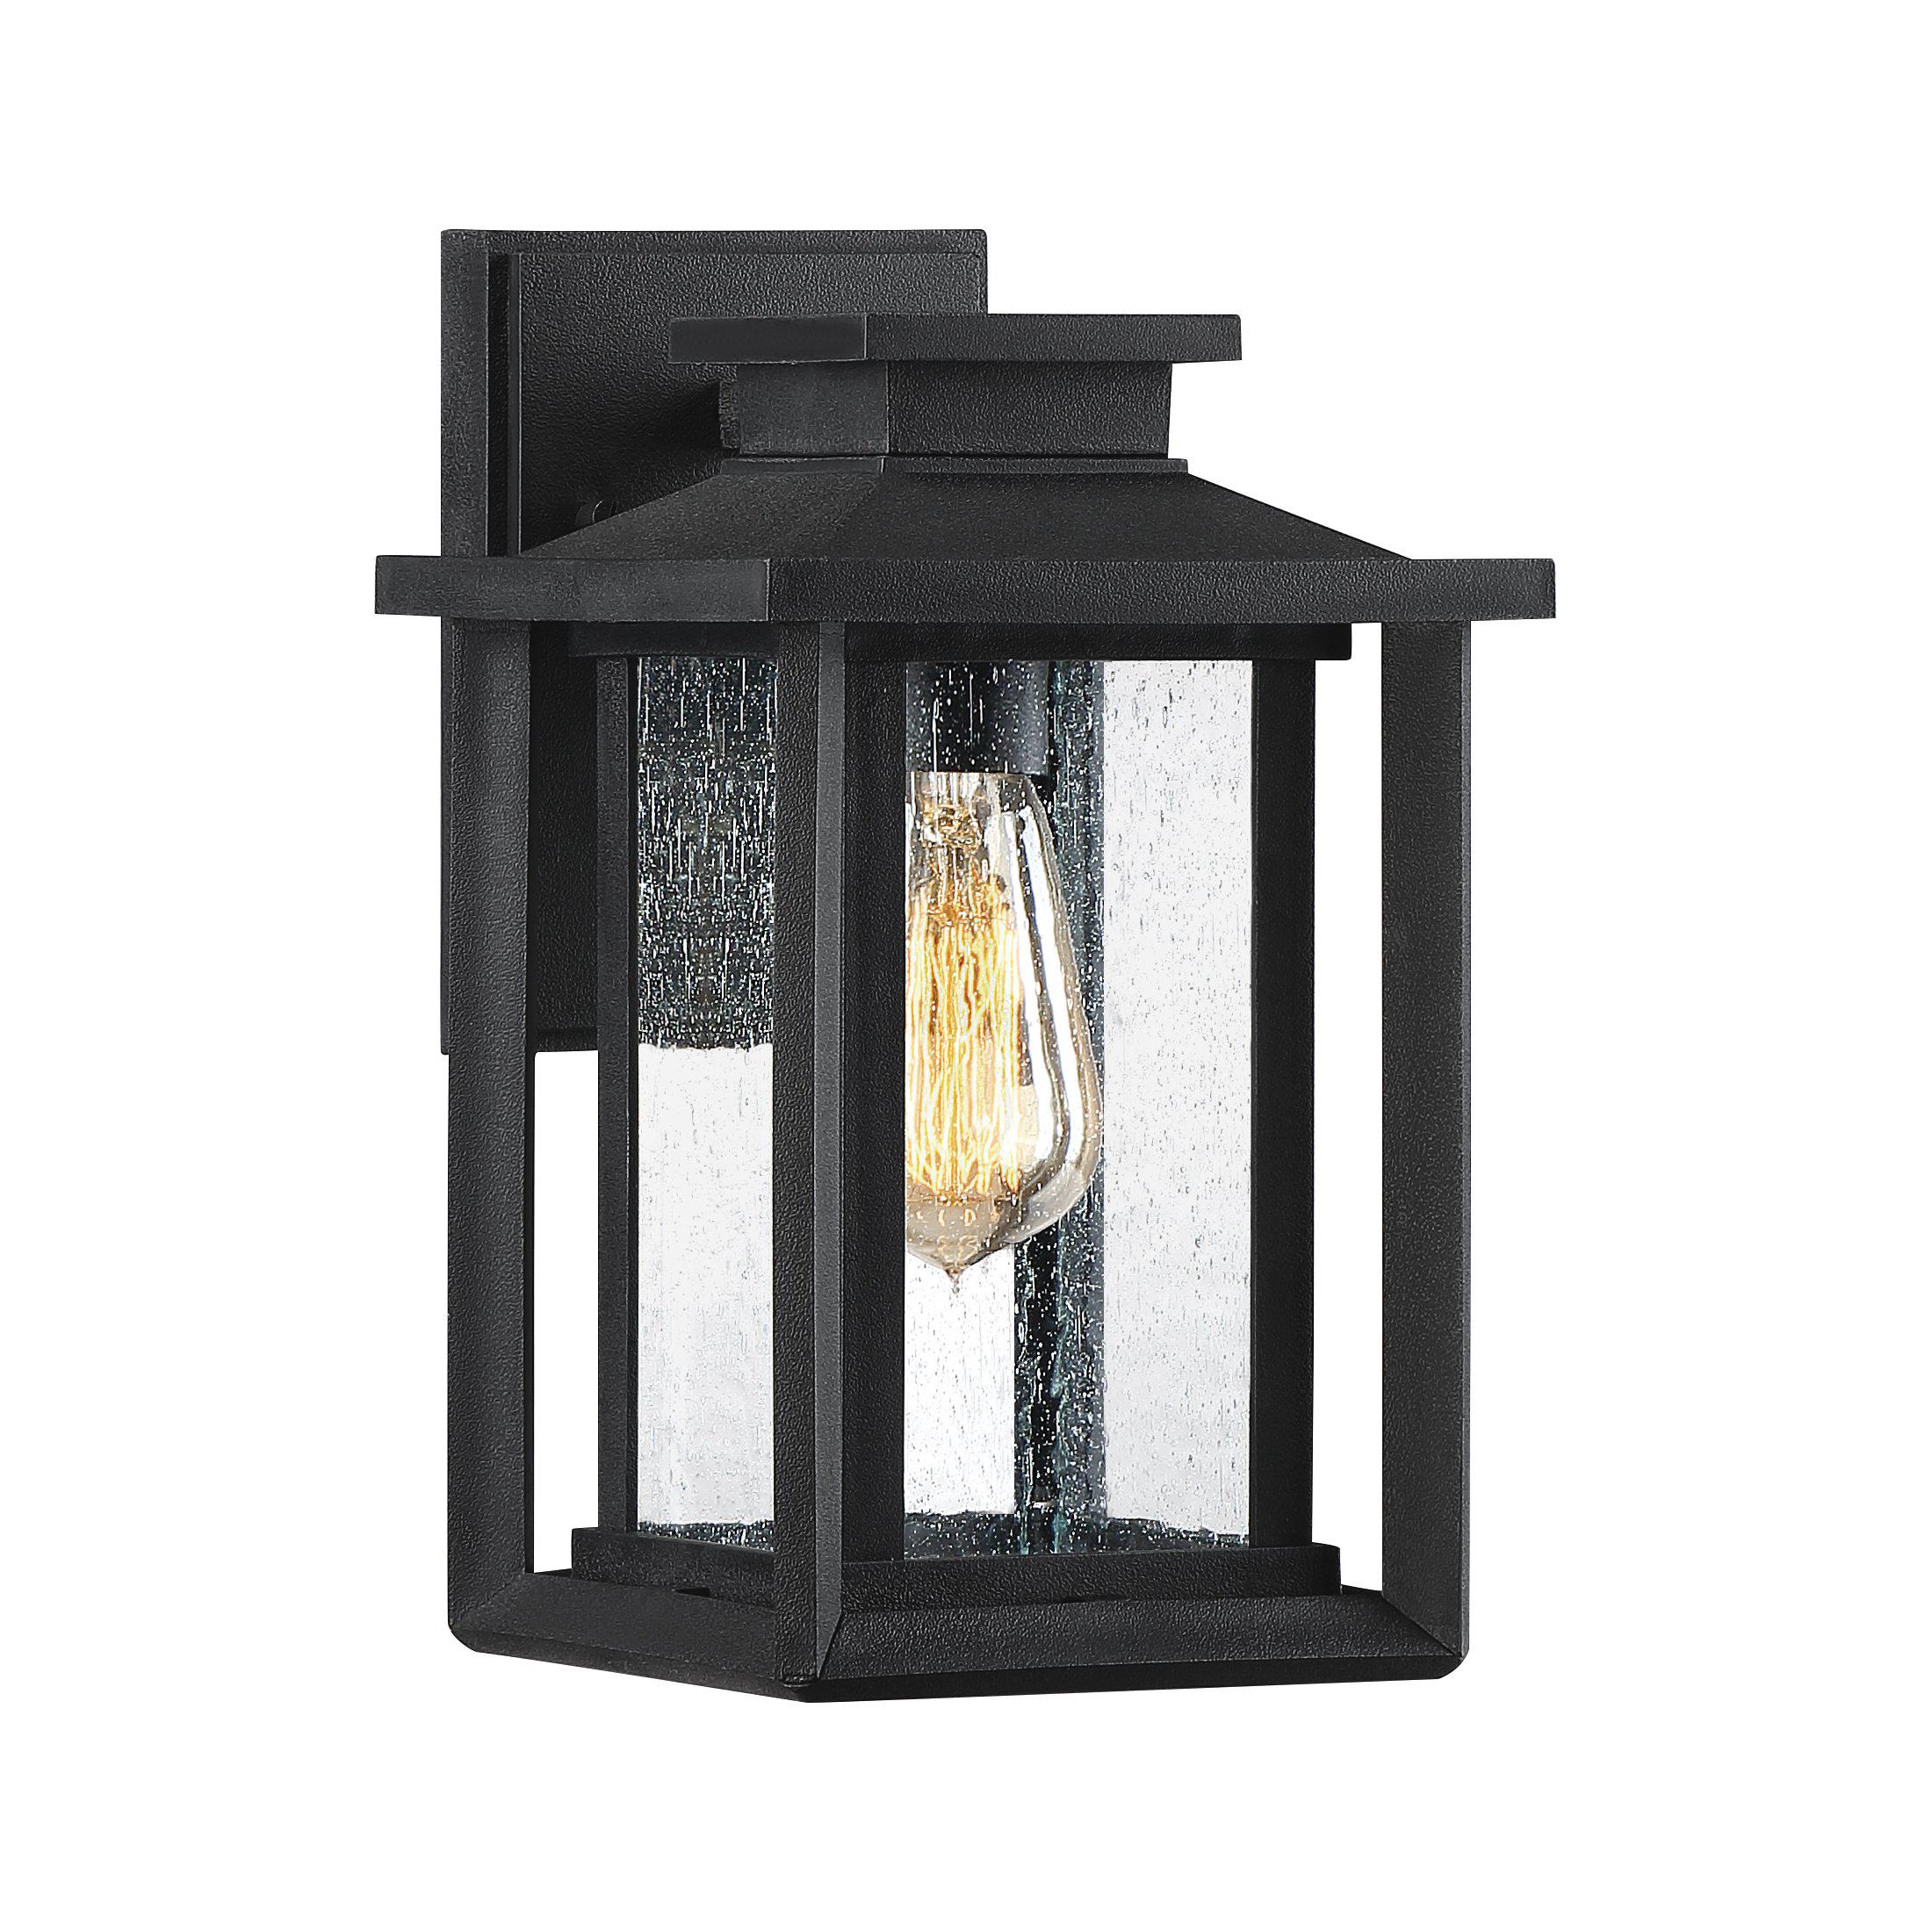 Quoizel Wakefield Outdoor Lantern, Small | Overstock Outdoor l Wall Quoizel Inc Earth Black  